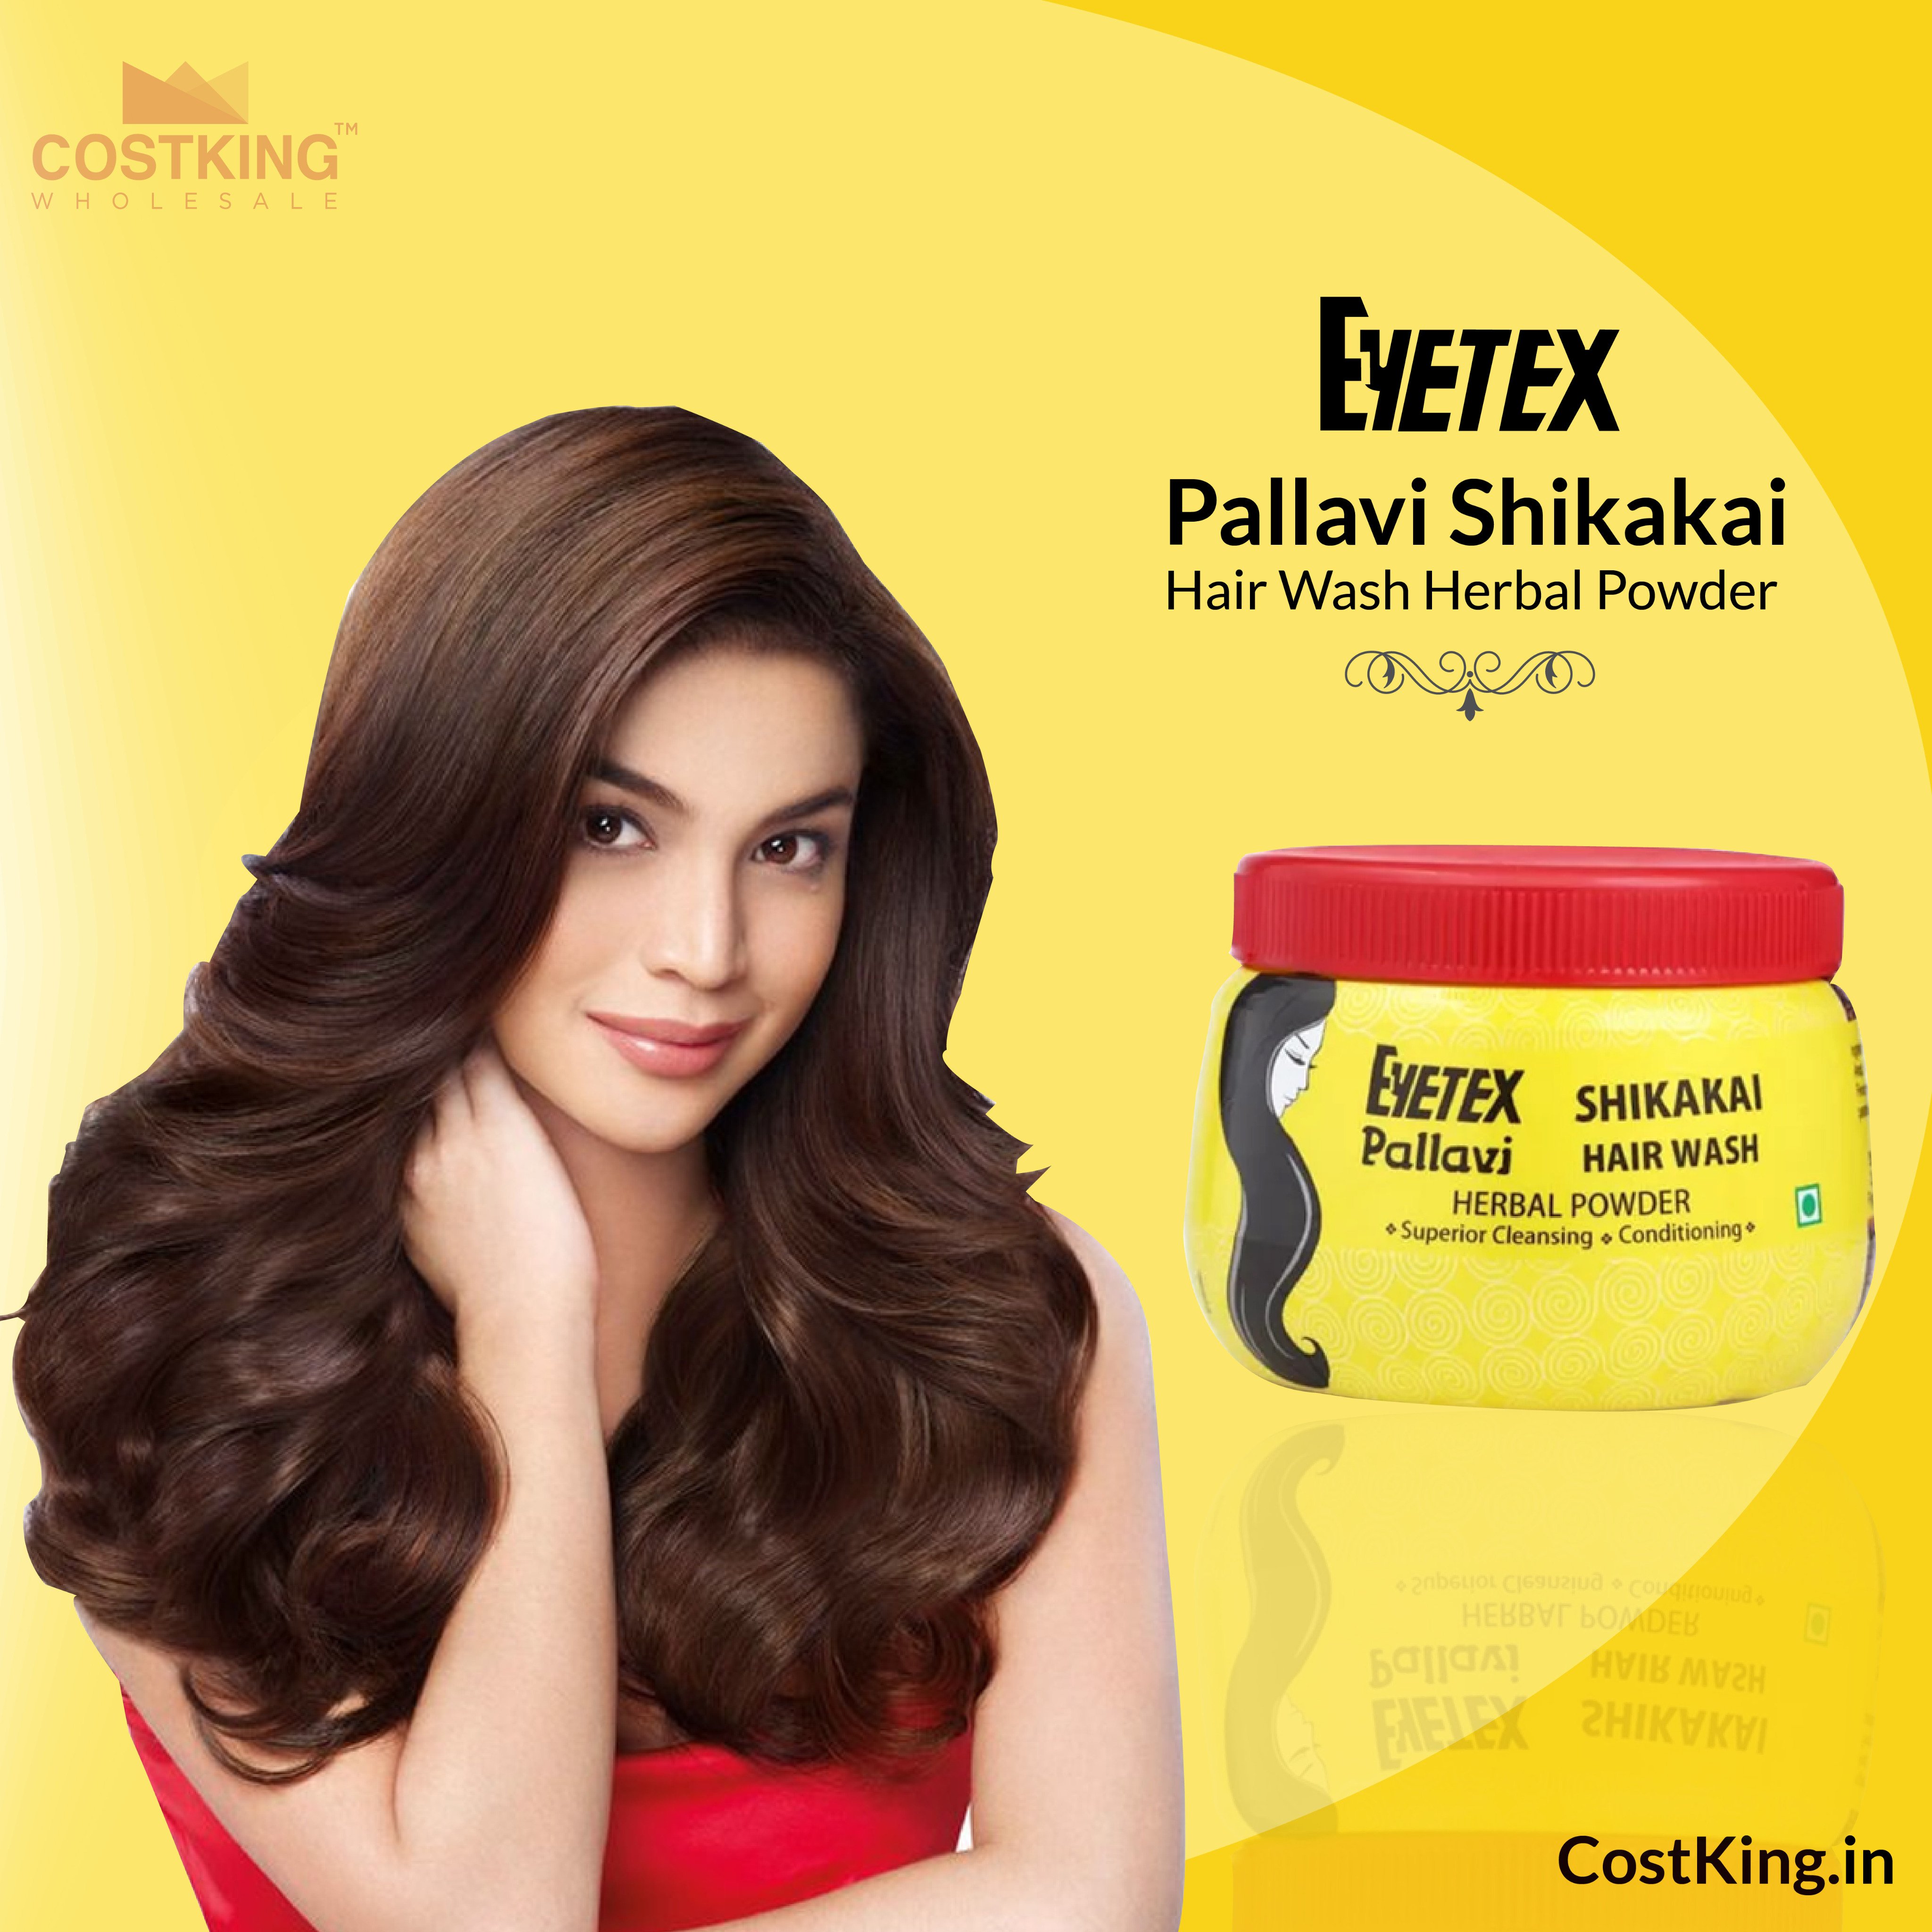 CostKing on X: Eyetex pallavi blend of herbal powders like shikakai,  hibiscus, fenugreek and amla. It leaves hair soft and manageable. Shop now  at @costkingdotin  #costkingdotin #eyetex  #shikakaipowder #haircare #tamilnadu https